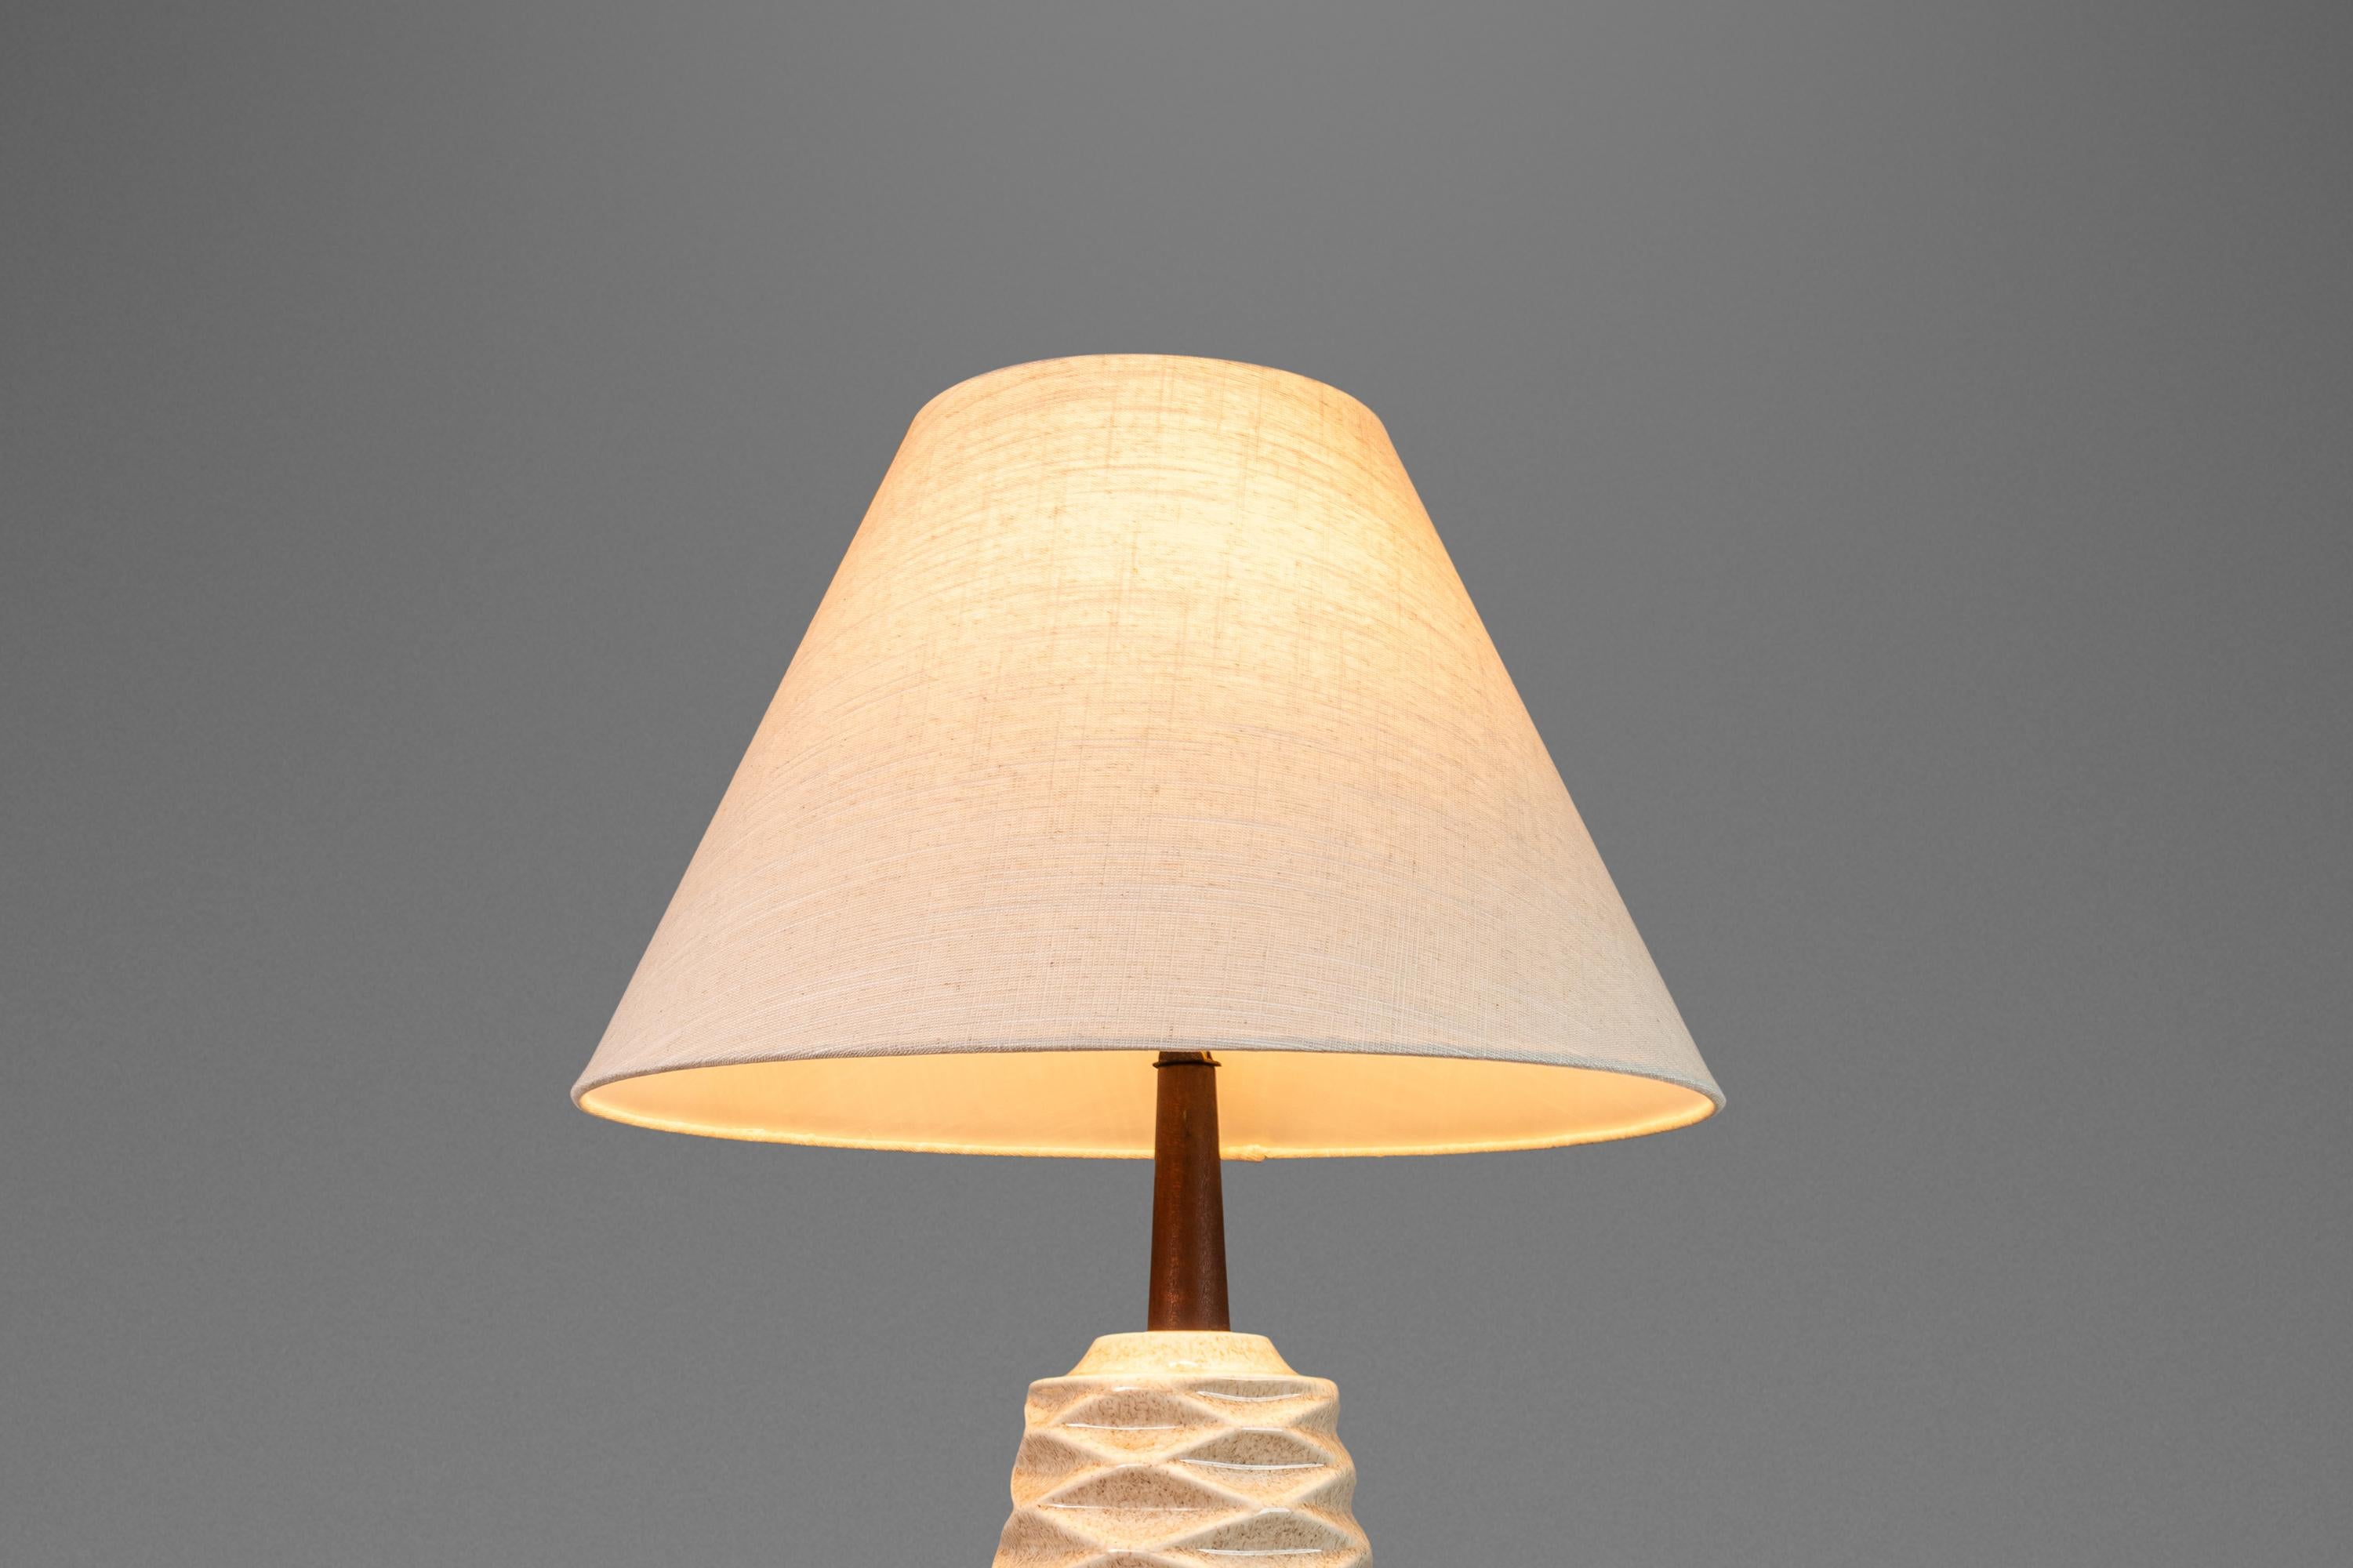 Set of Two ( 2 ) Mid-Century Modern Ceramic Table Lamps w/ Walnut Necks, 1960's For Sale 8